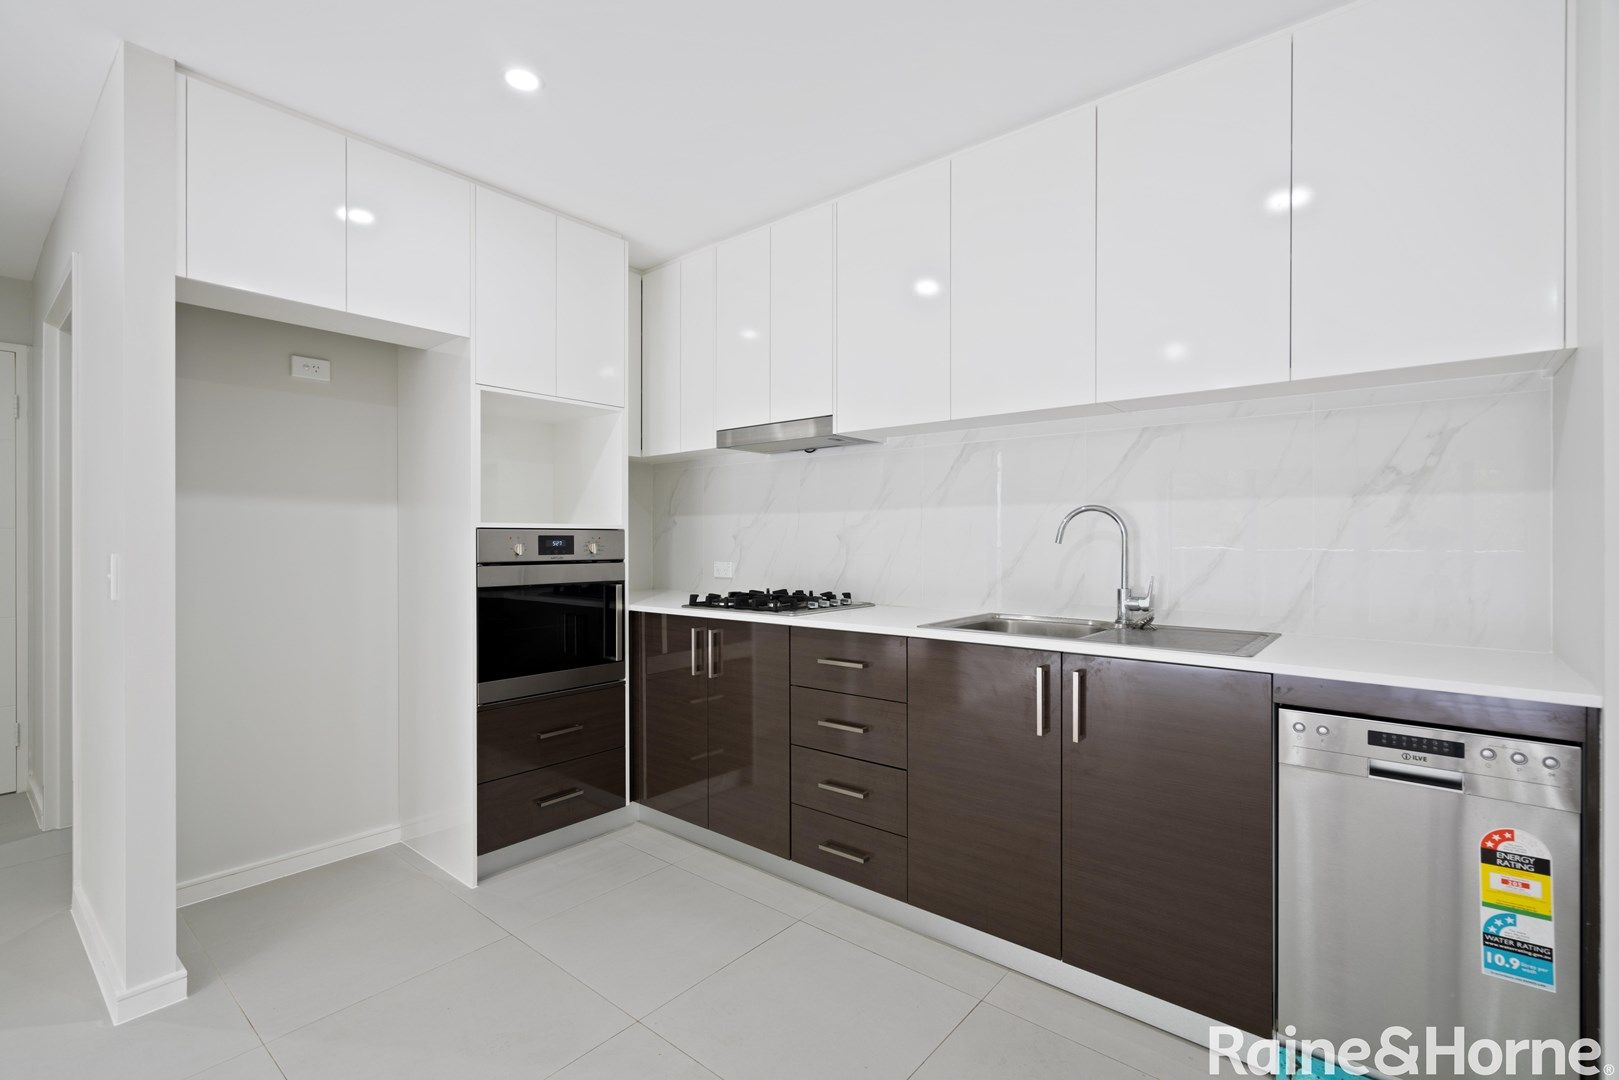 1 bedrooms Apartment / Unit / Flat in 23/14-16 Batley Street GOSFORD NSW, 2250